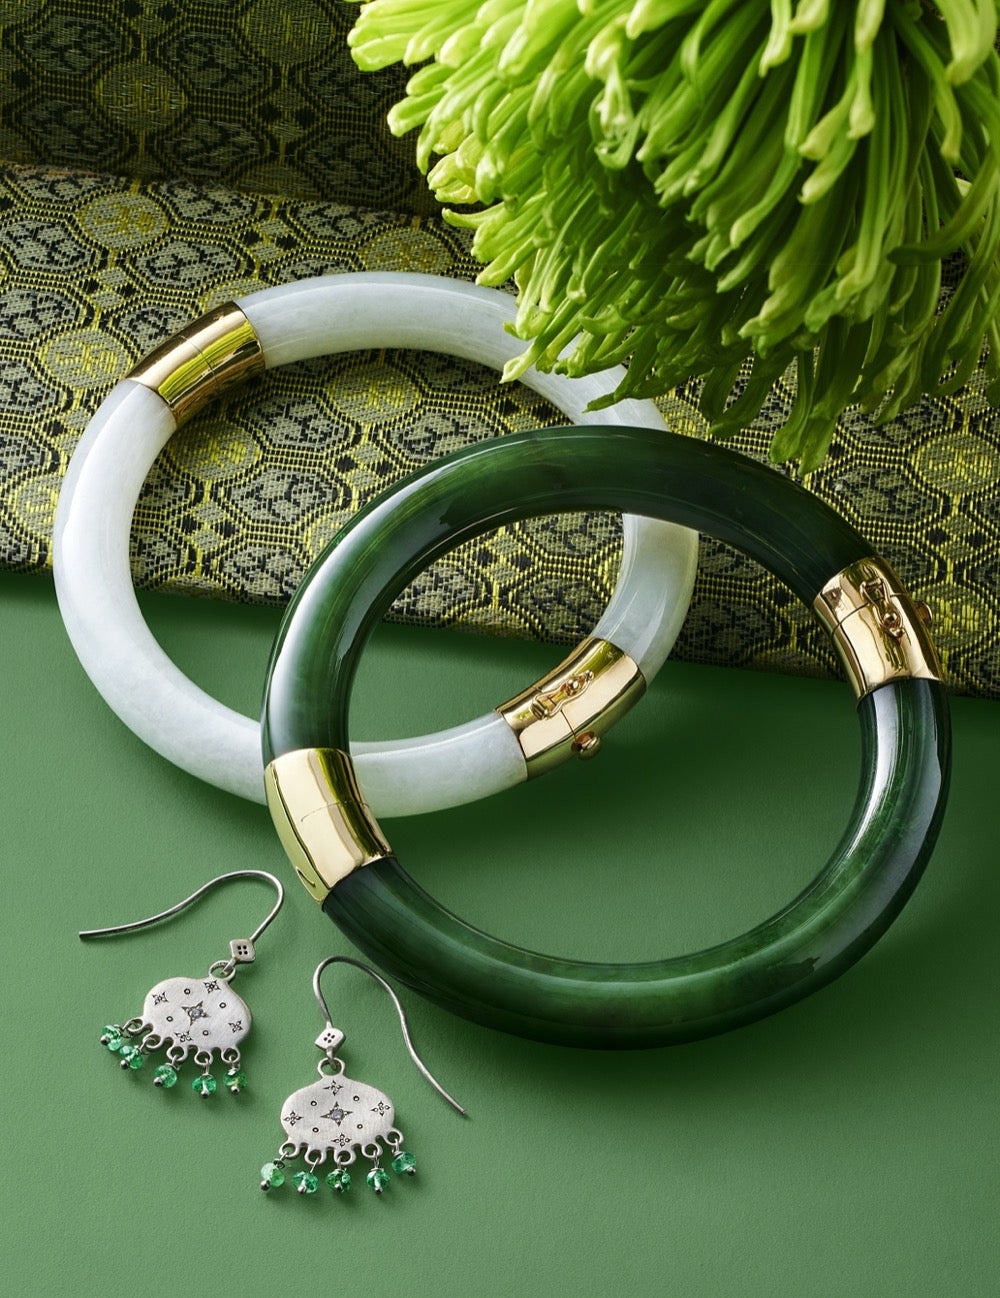 Pacific Bangle in Green Nephrite Jade